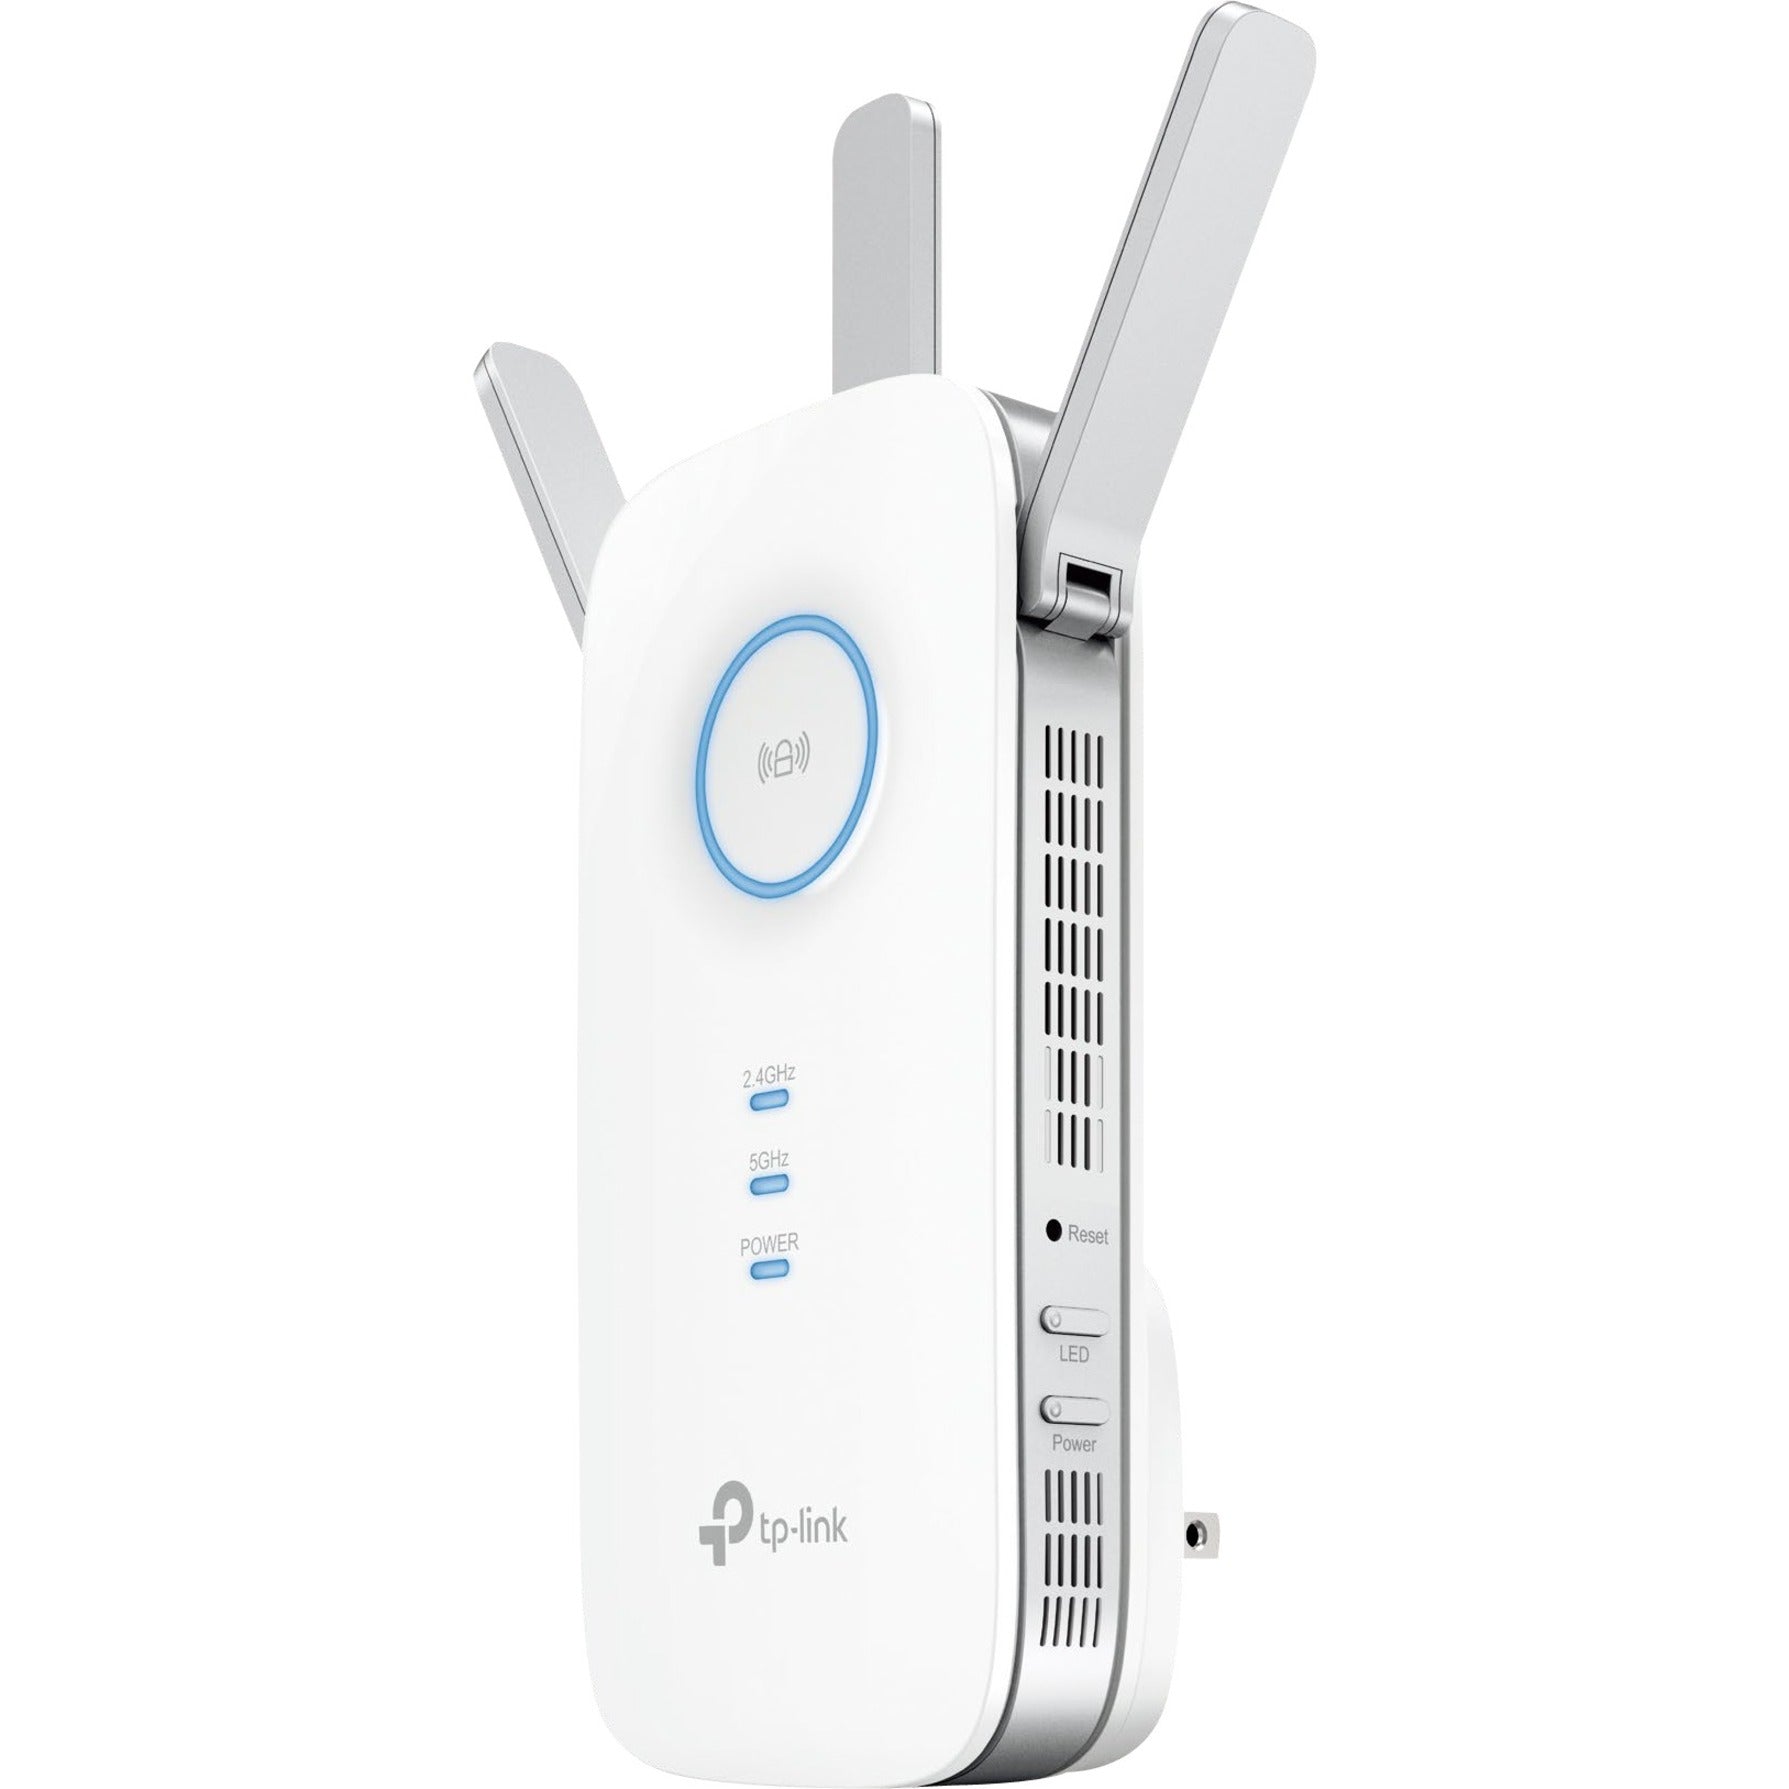 TP-Link RE550 AC1900 Wi-Fi Range Extender, Extend Your Wireless Network Coverage